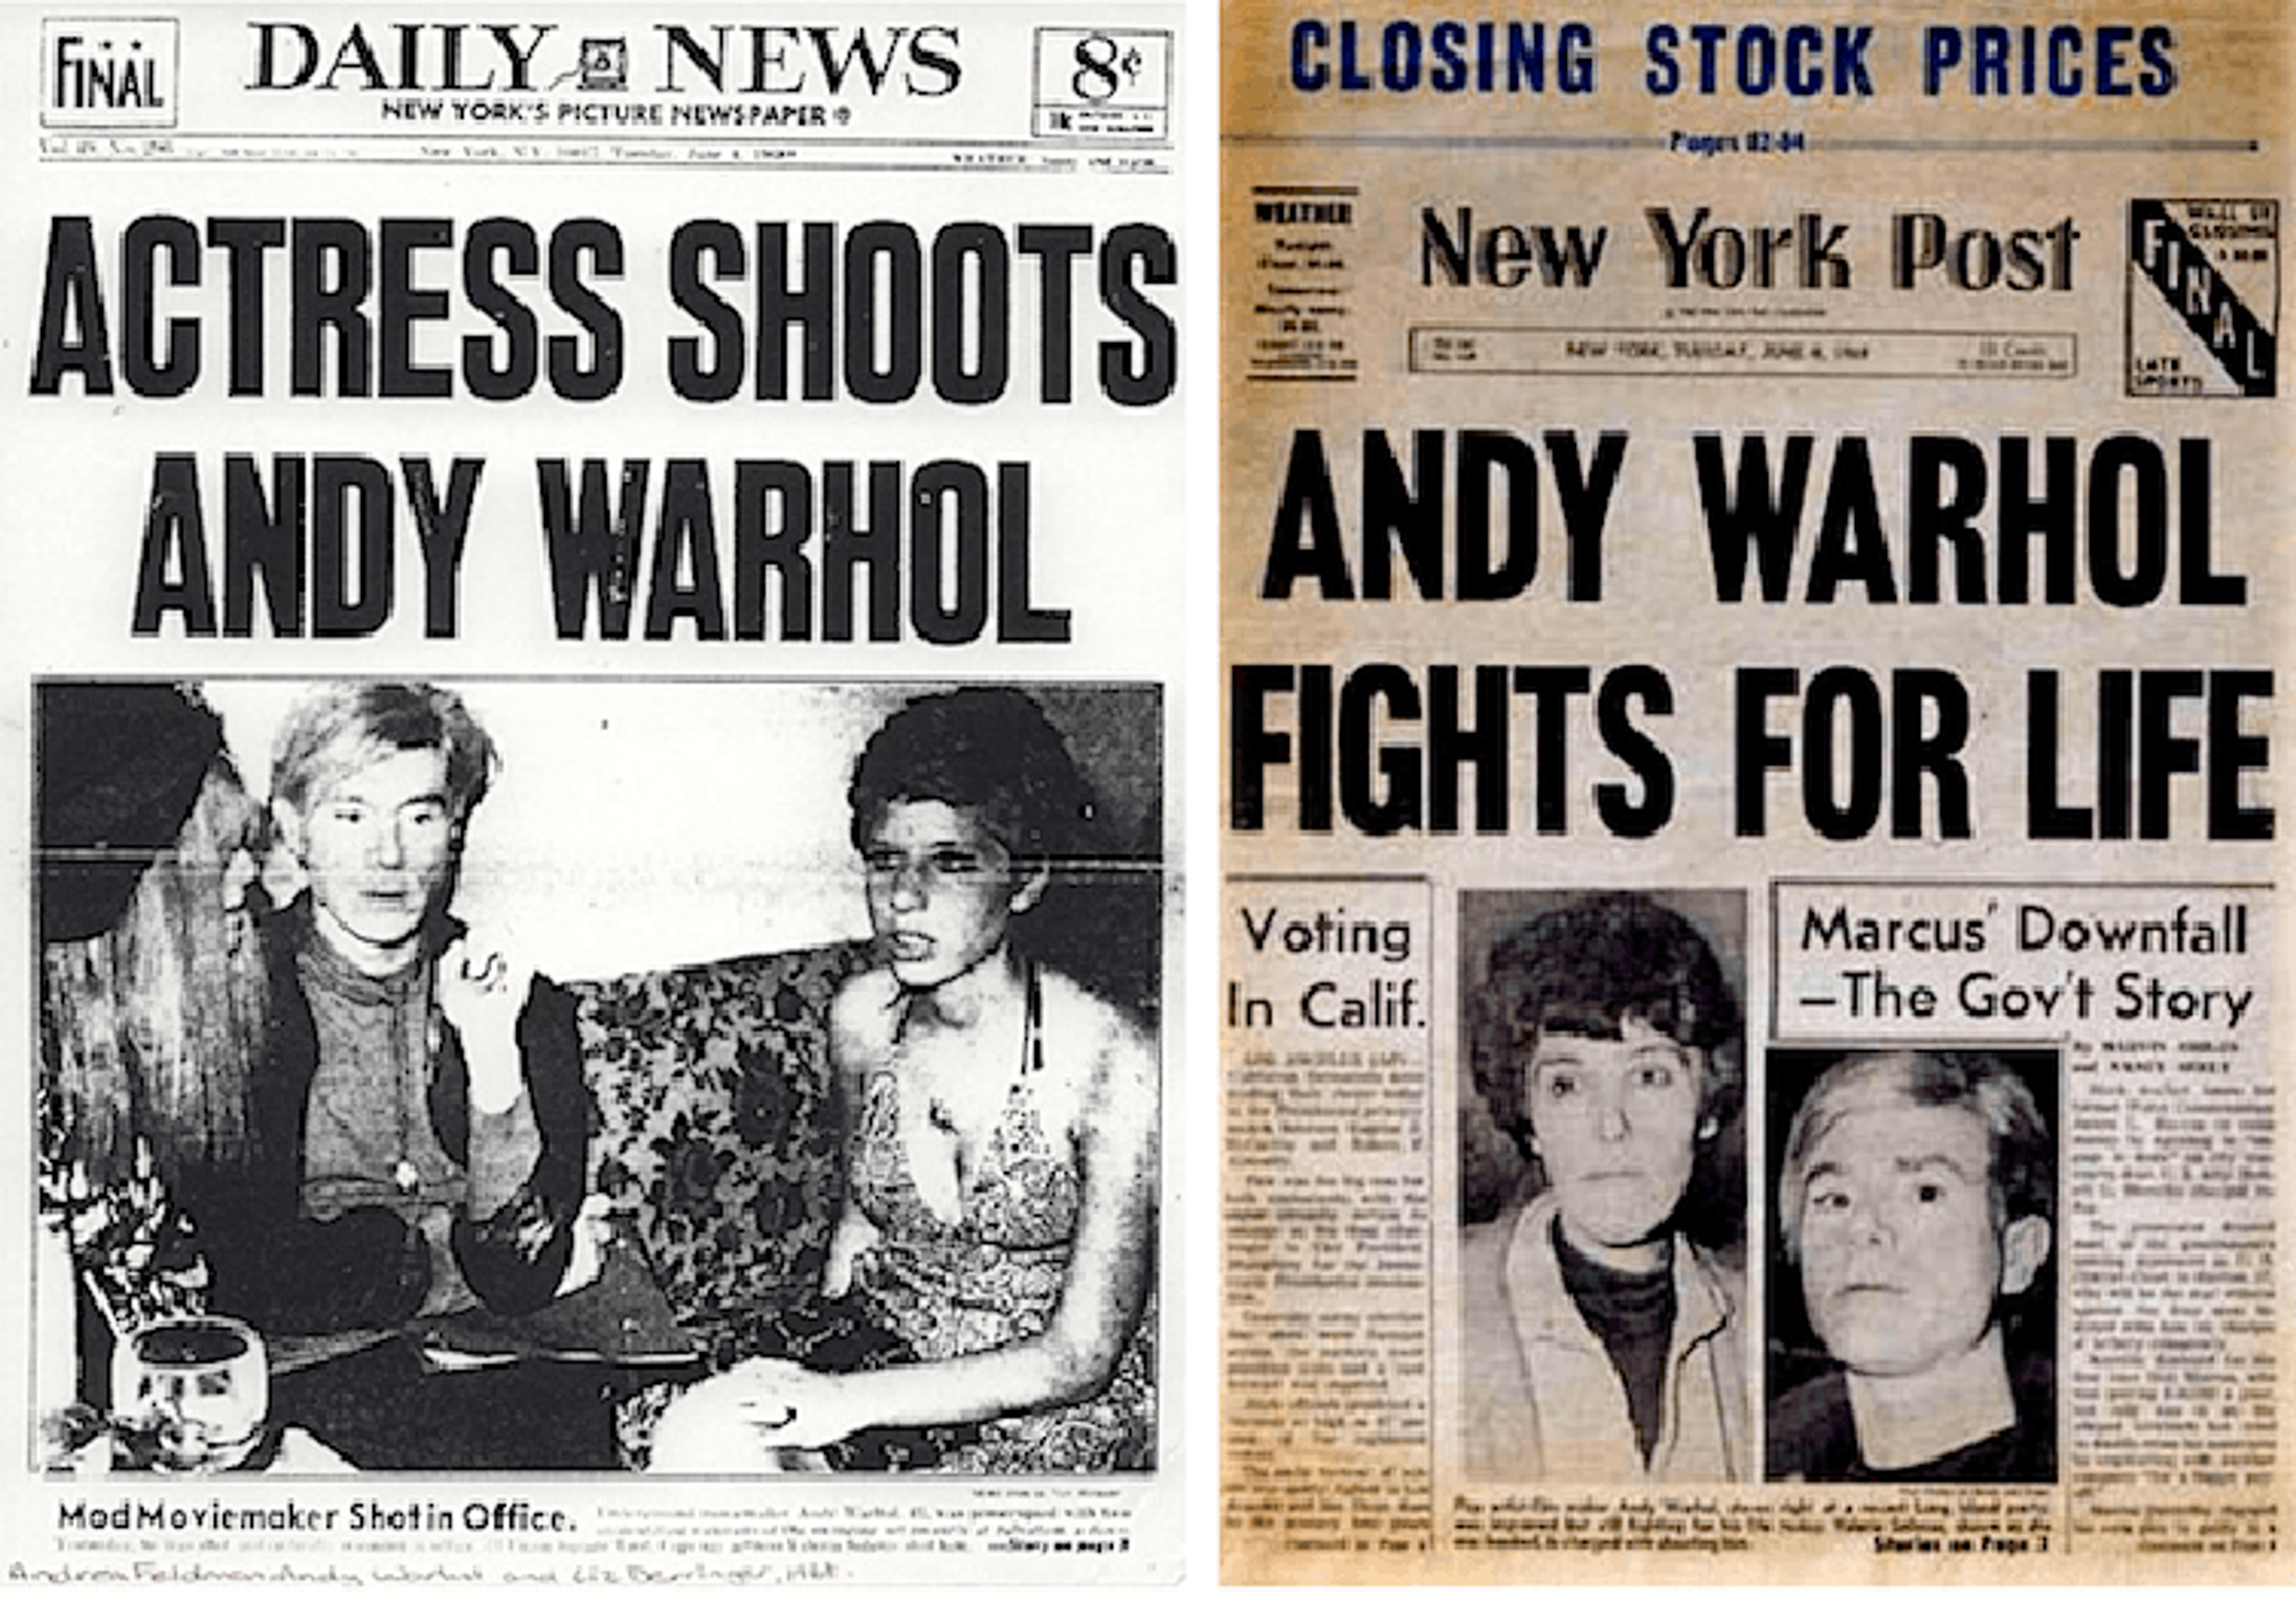 Daily News and New York Post, 4 June 1968